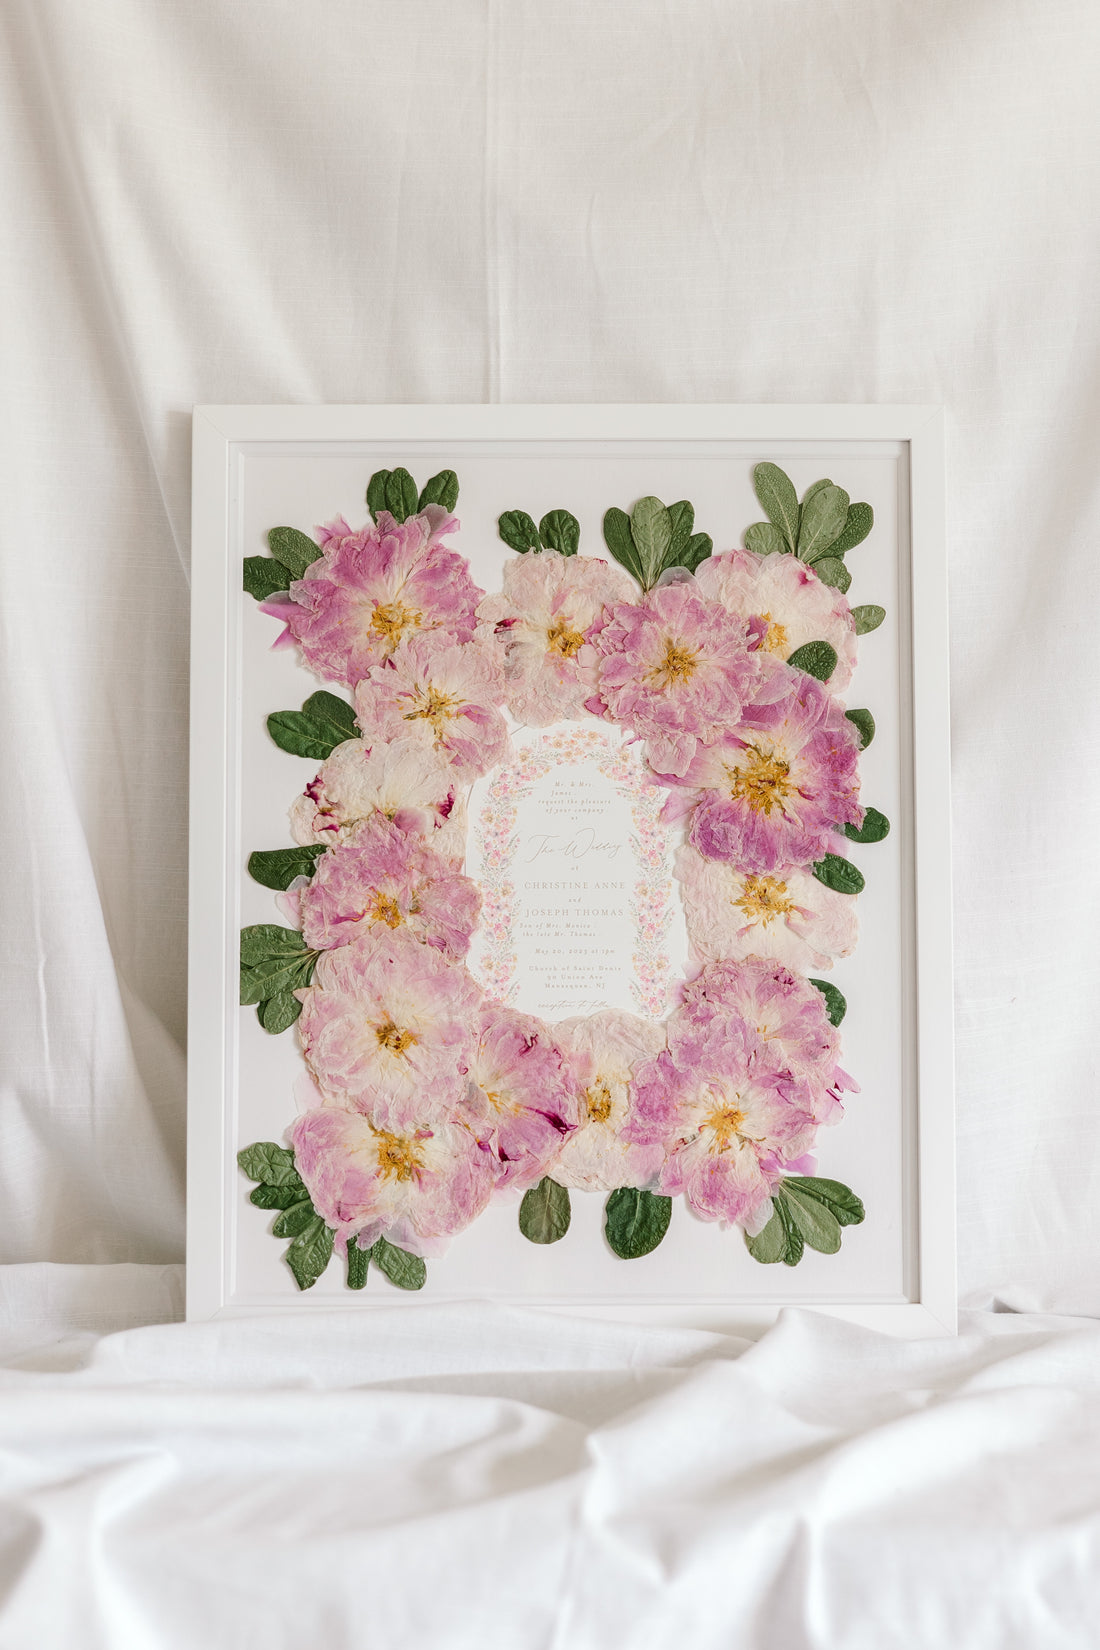 A bouquet of pressed pink peonies is displayed with a wedding invitation in a 16x20 white wood frame.